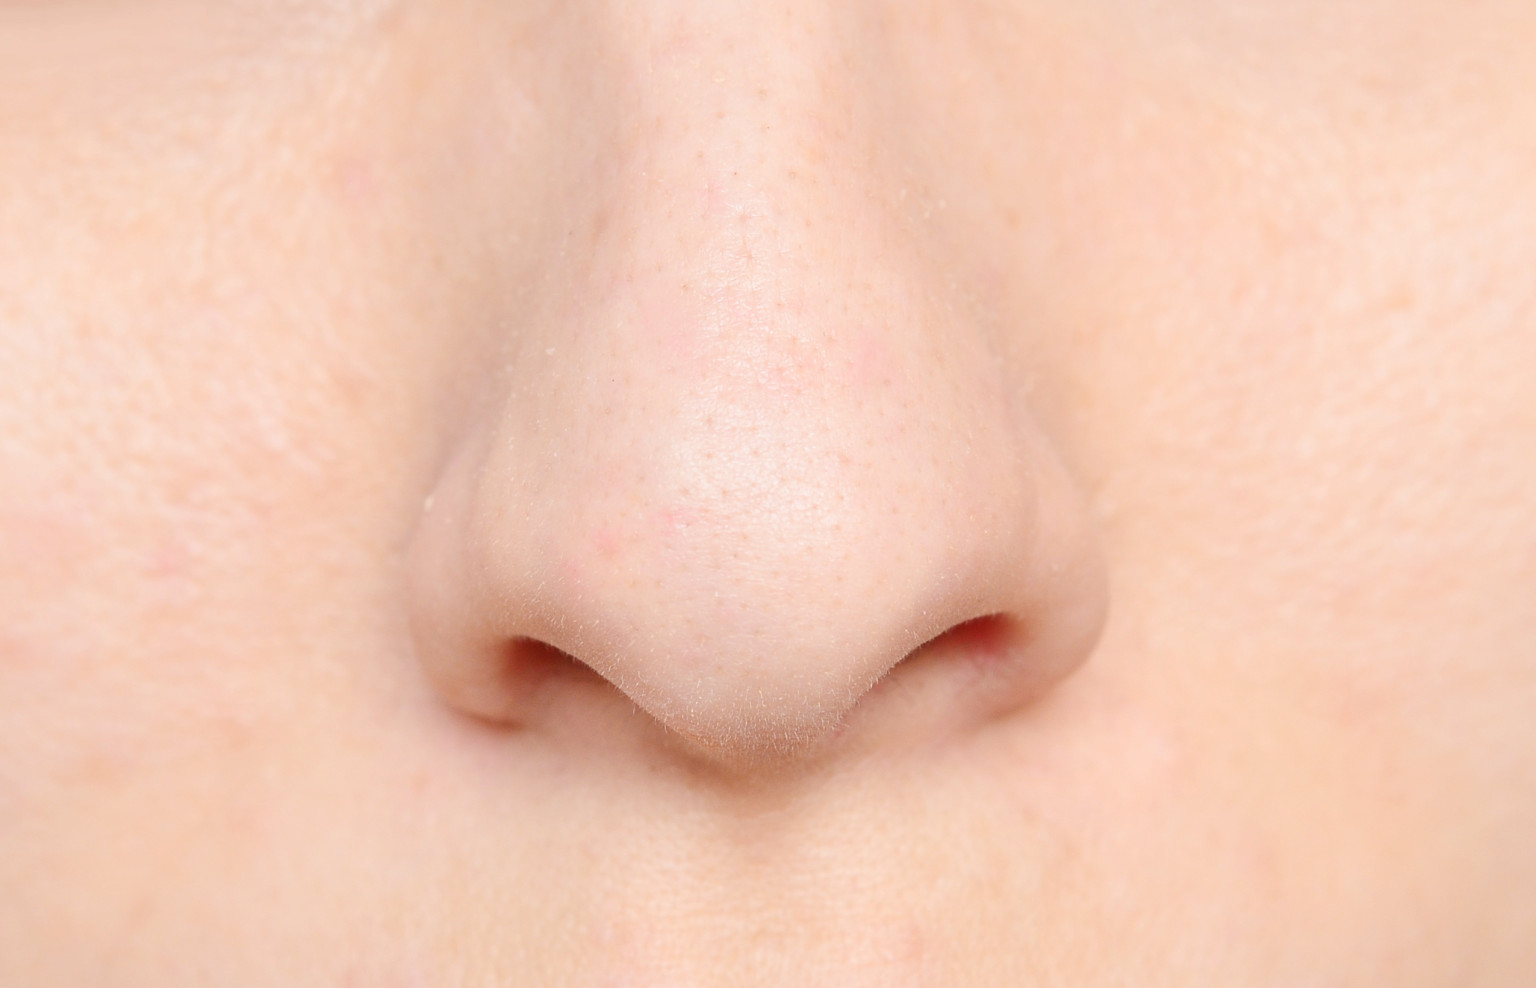 Nose Anatomy Stock Images, Royalty-Free ... - Shutterstock